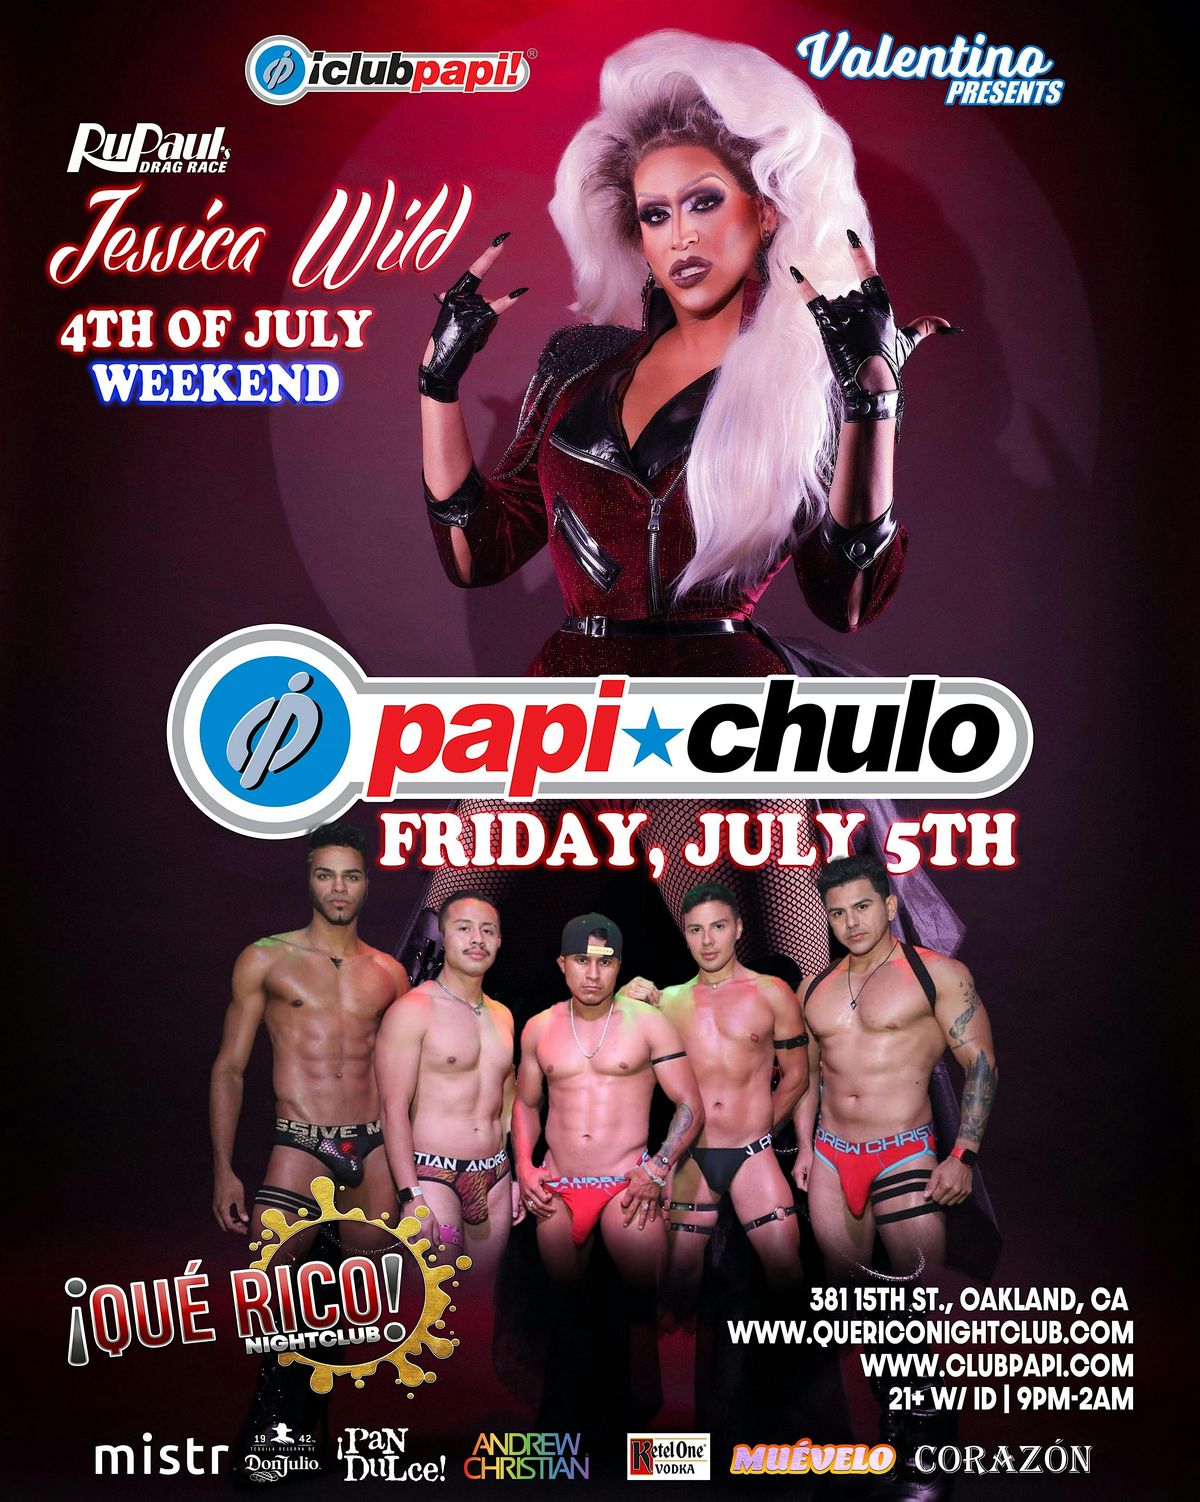 Jessica Wild - 4th of July Weekend at Que Rico